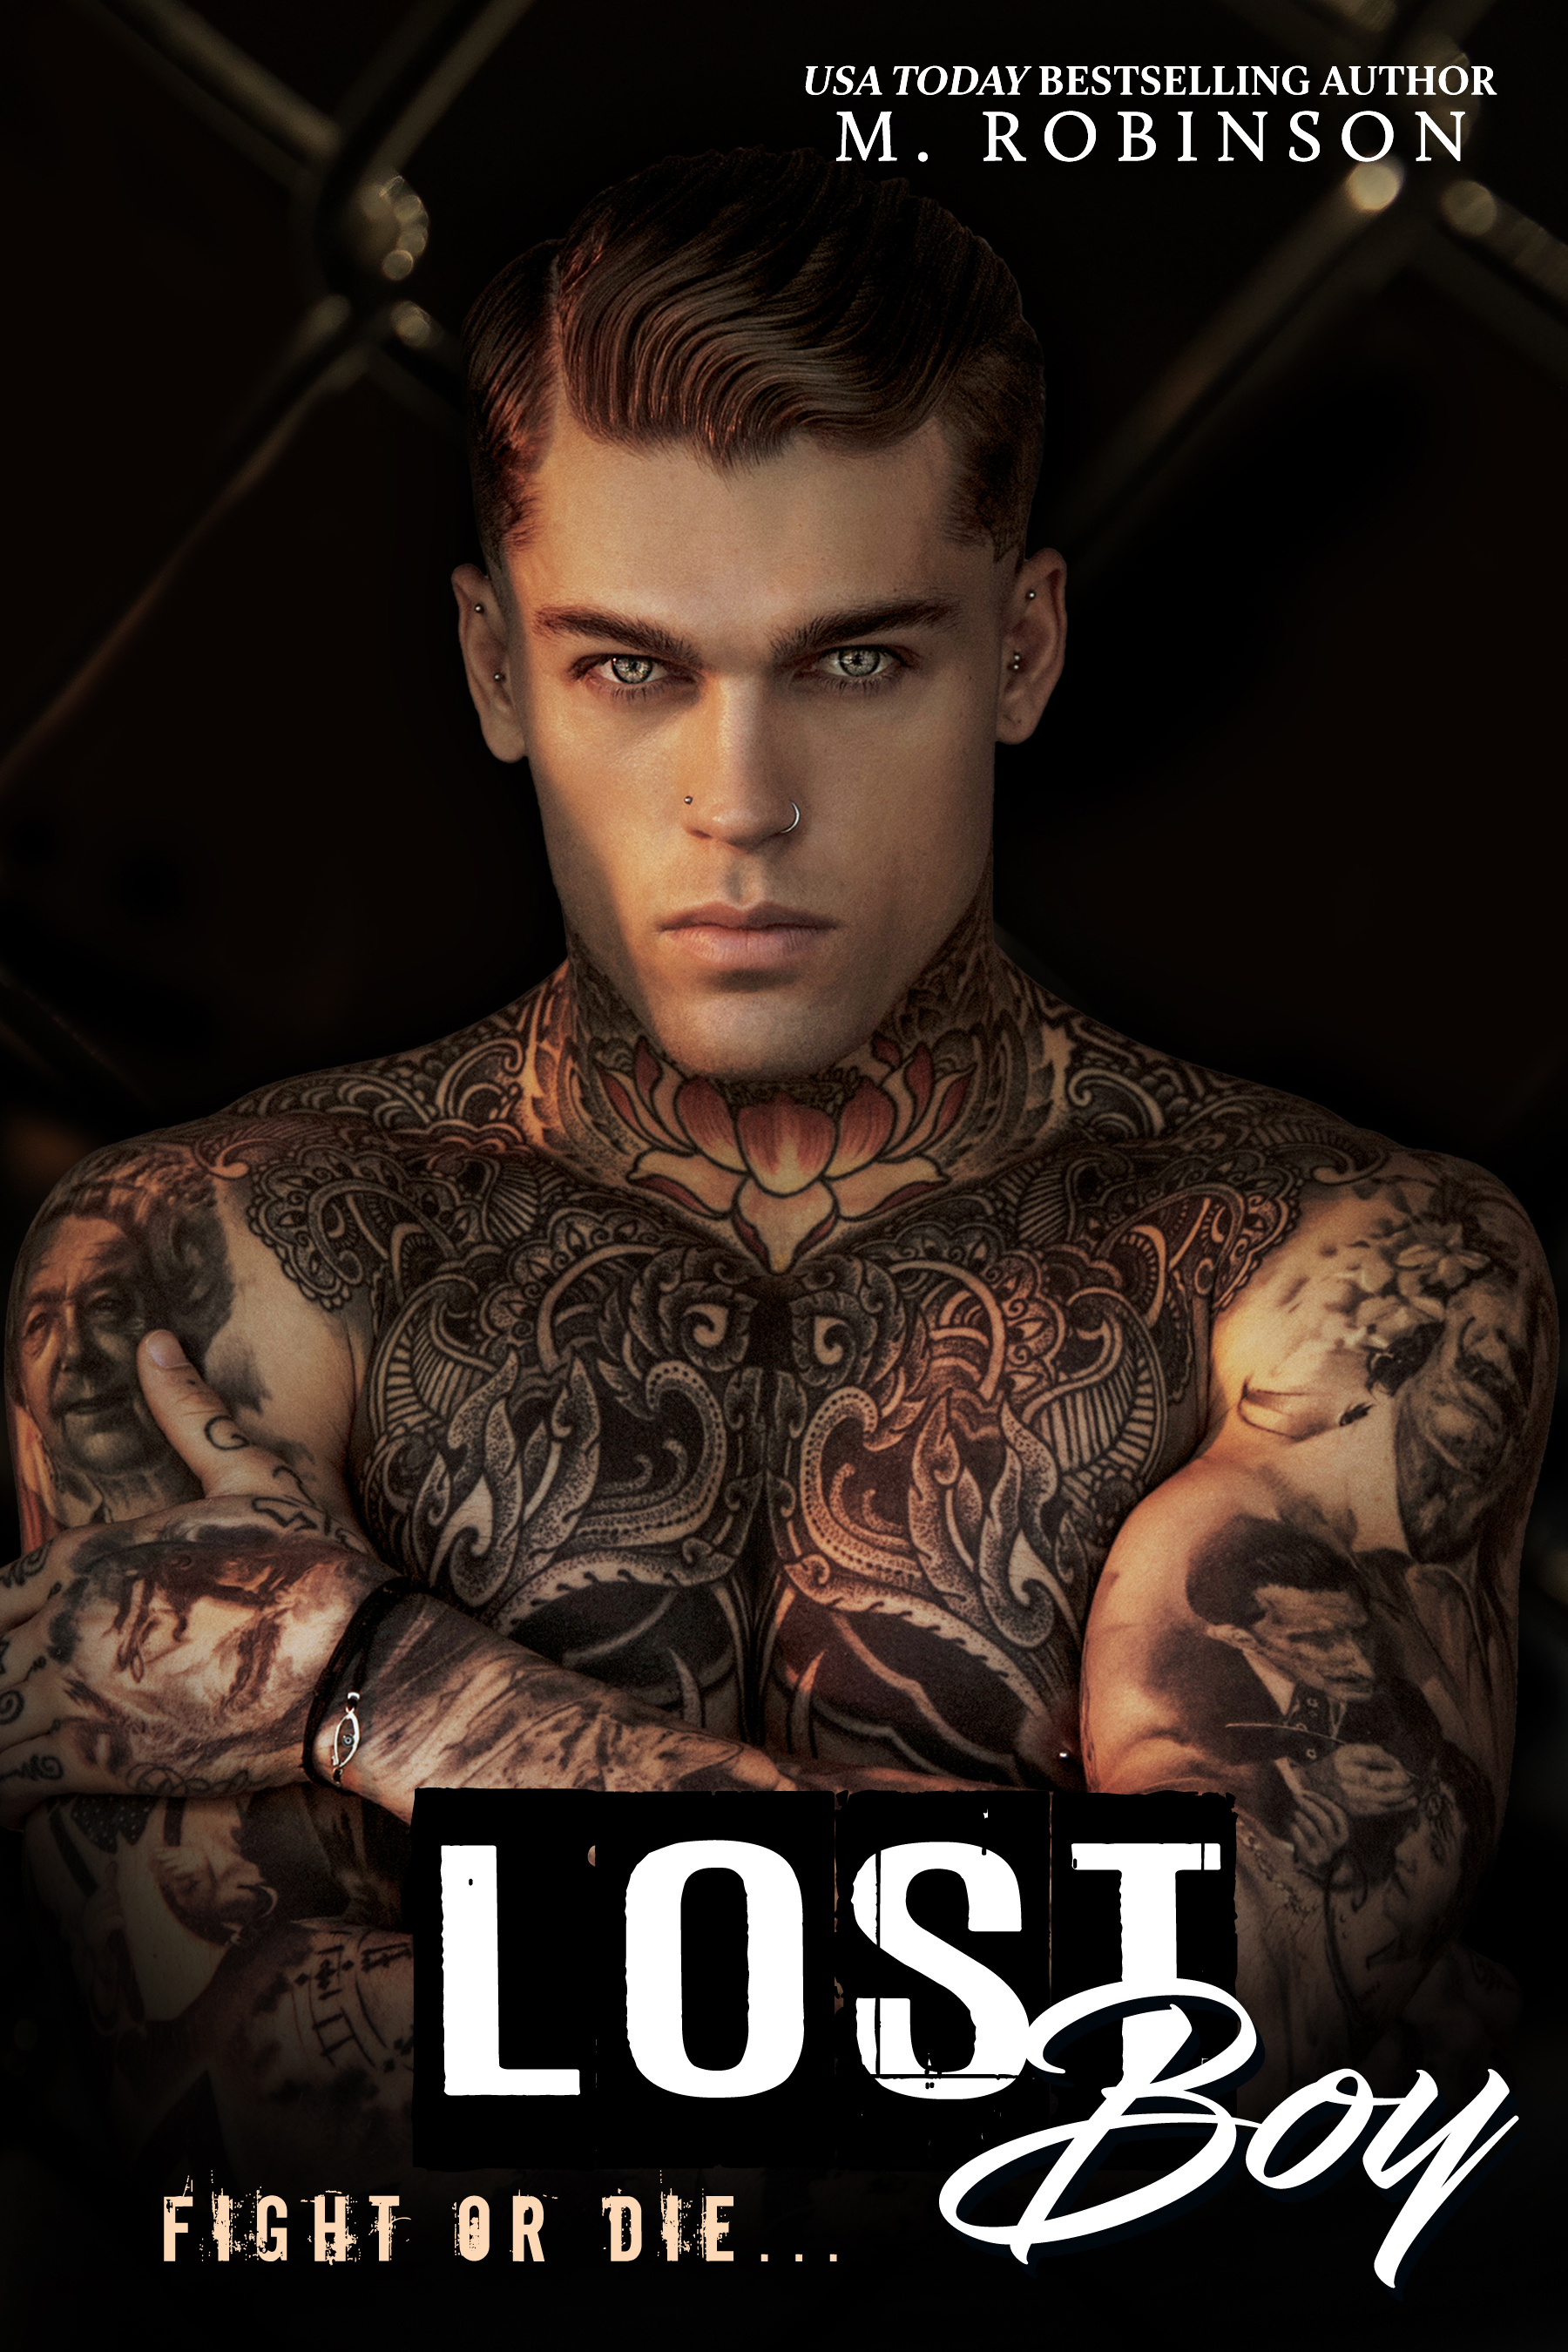 Lost Boy by M. Robinson [Review]